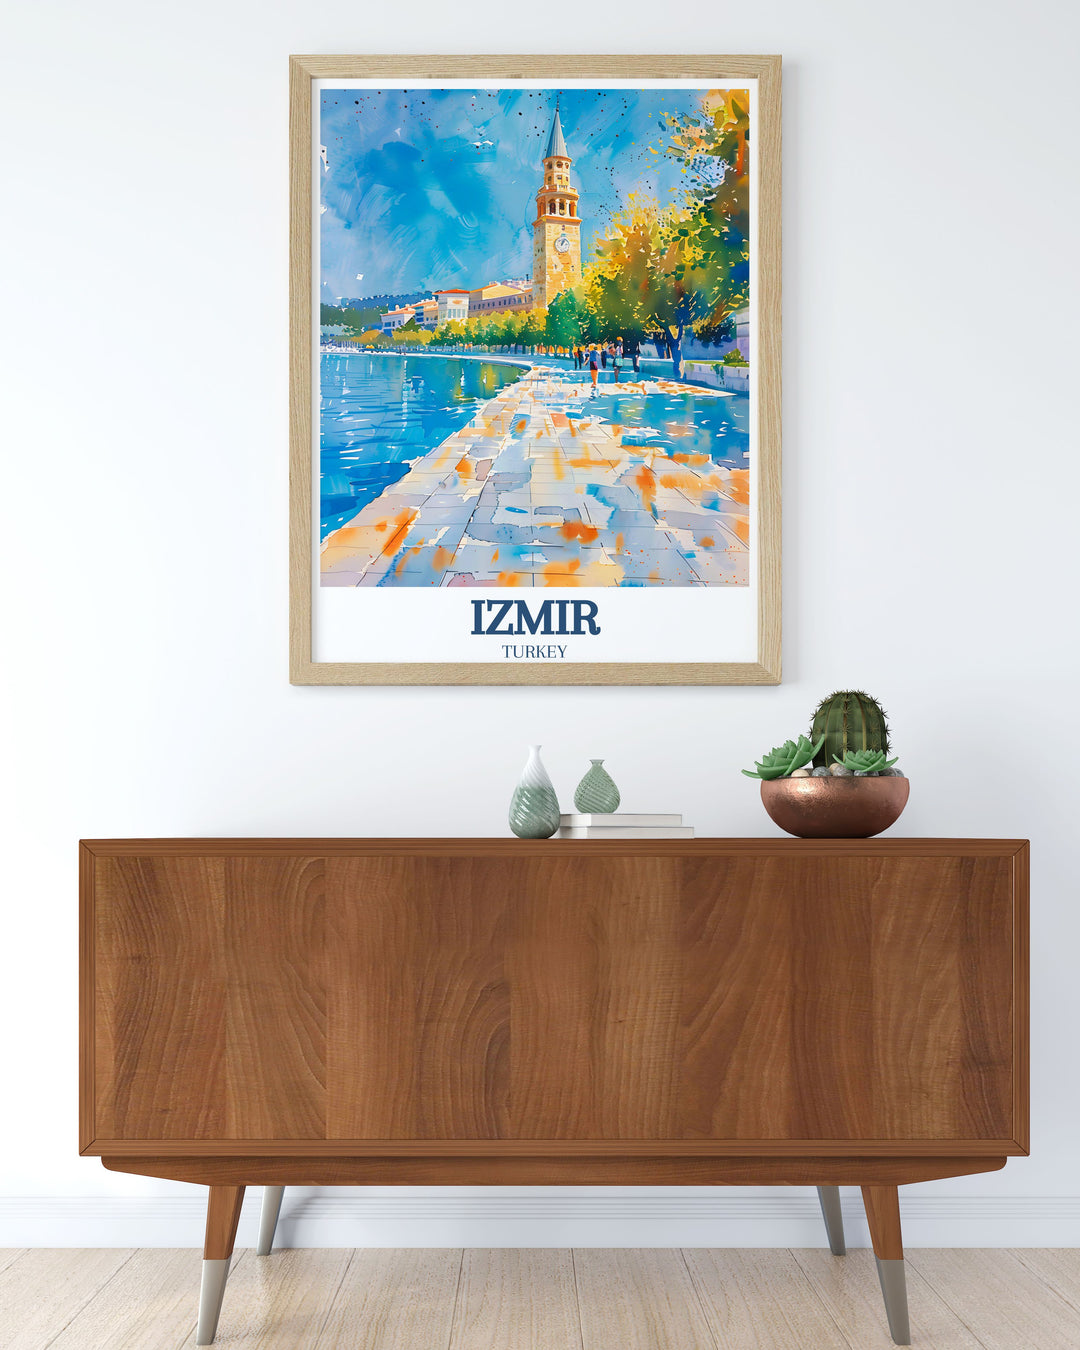 Featuring the bustling Kordon Promenade and the serene Aegean Sea, this poster brings the essence of Izmirs coastal beauty into your living space.